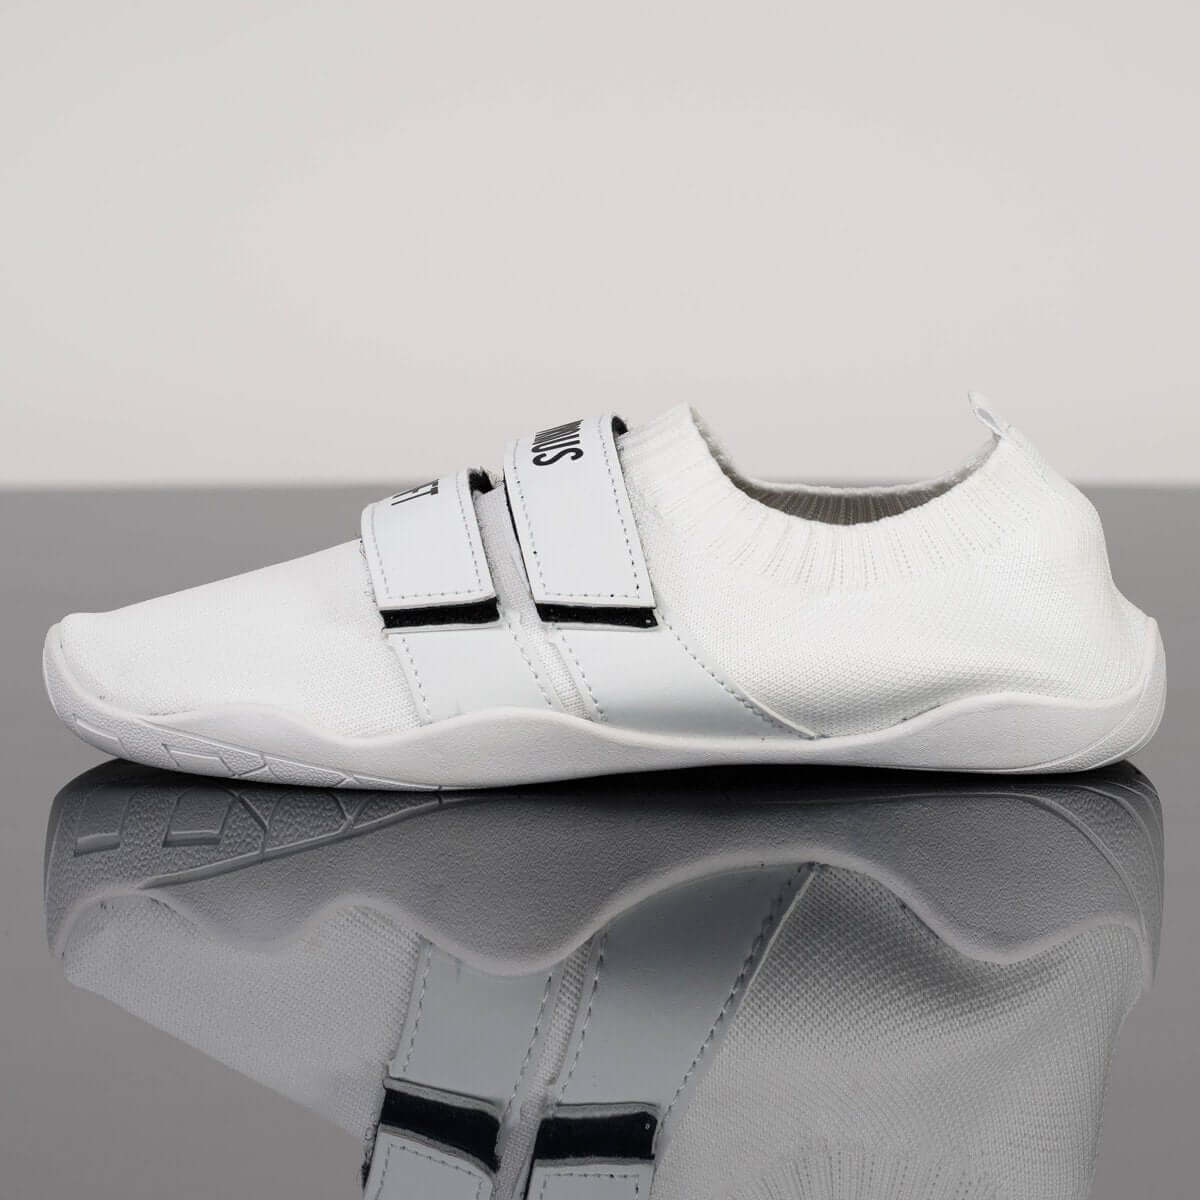 Notorious Lifters Gen 2 (Pure White)